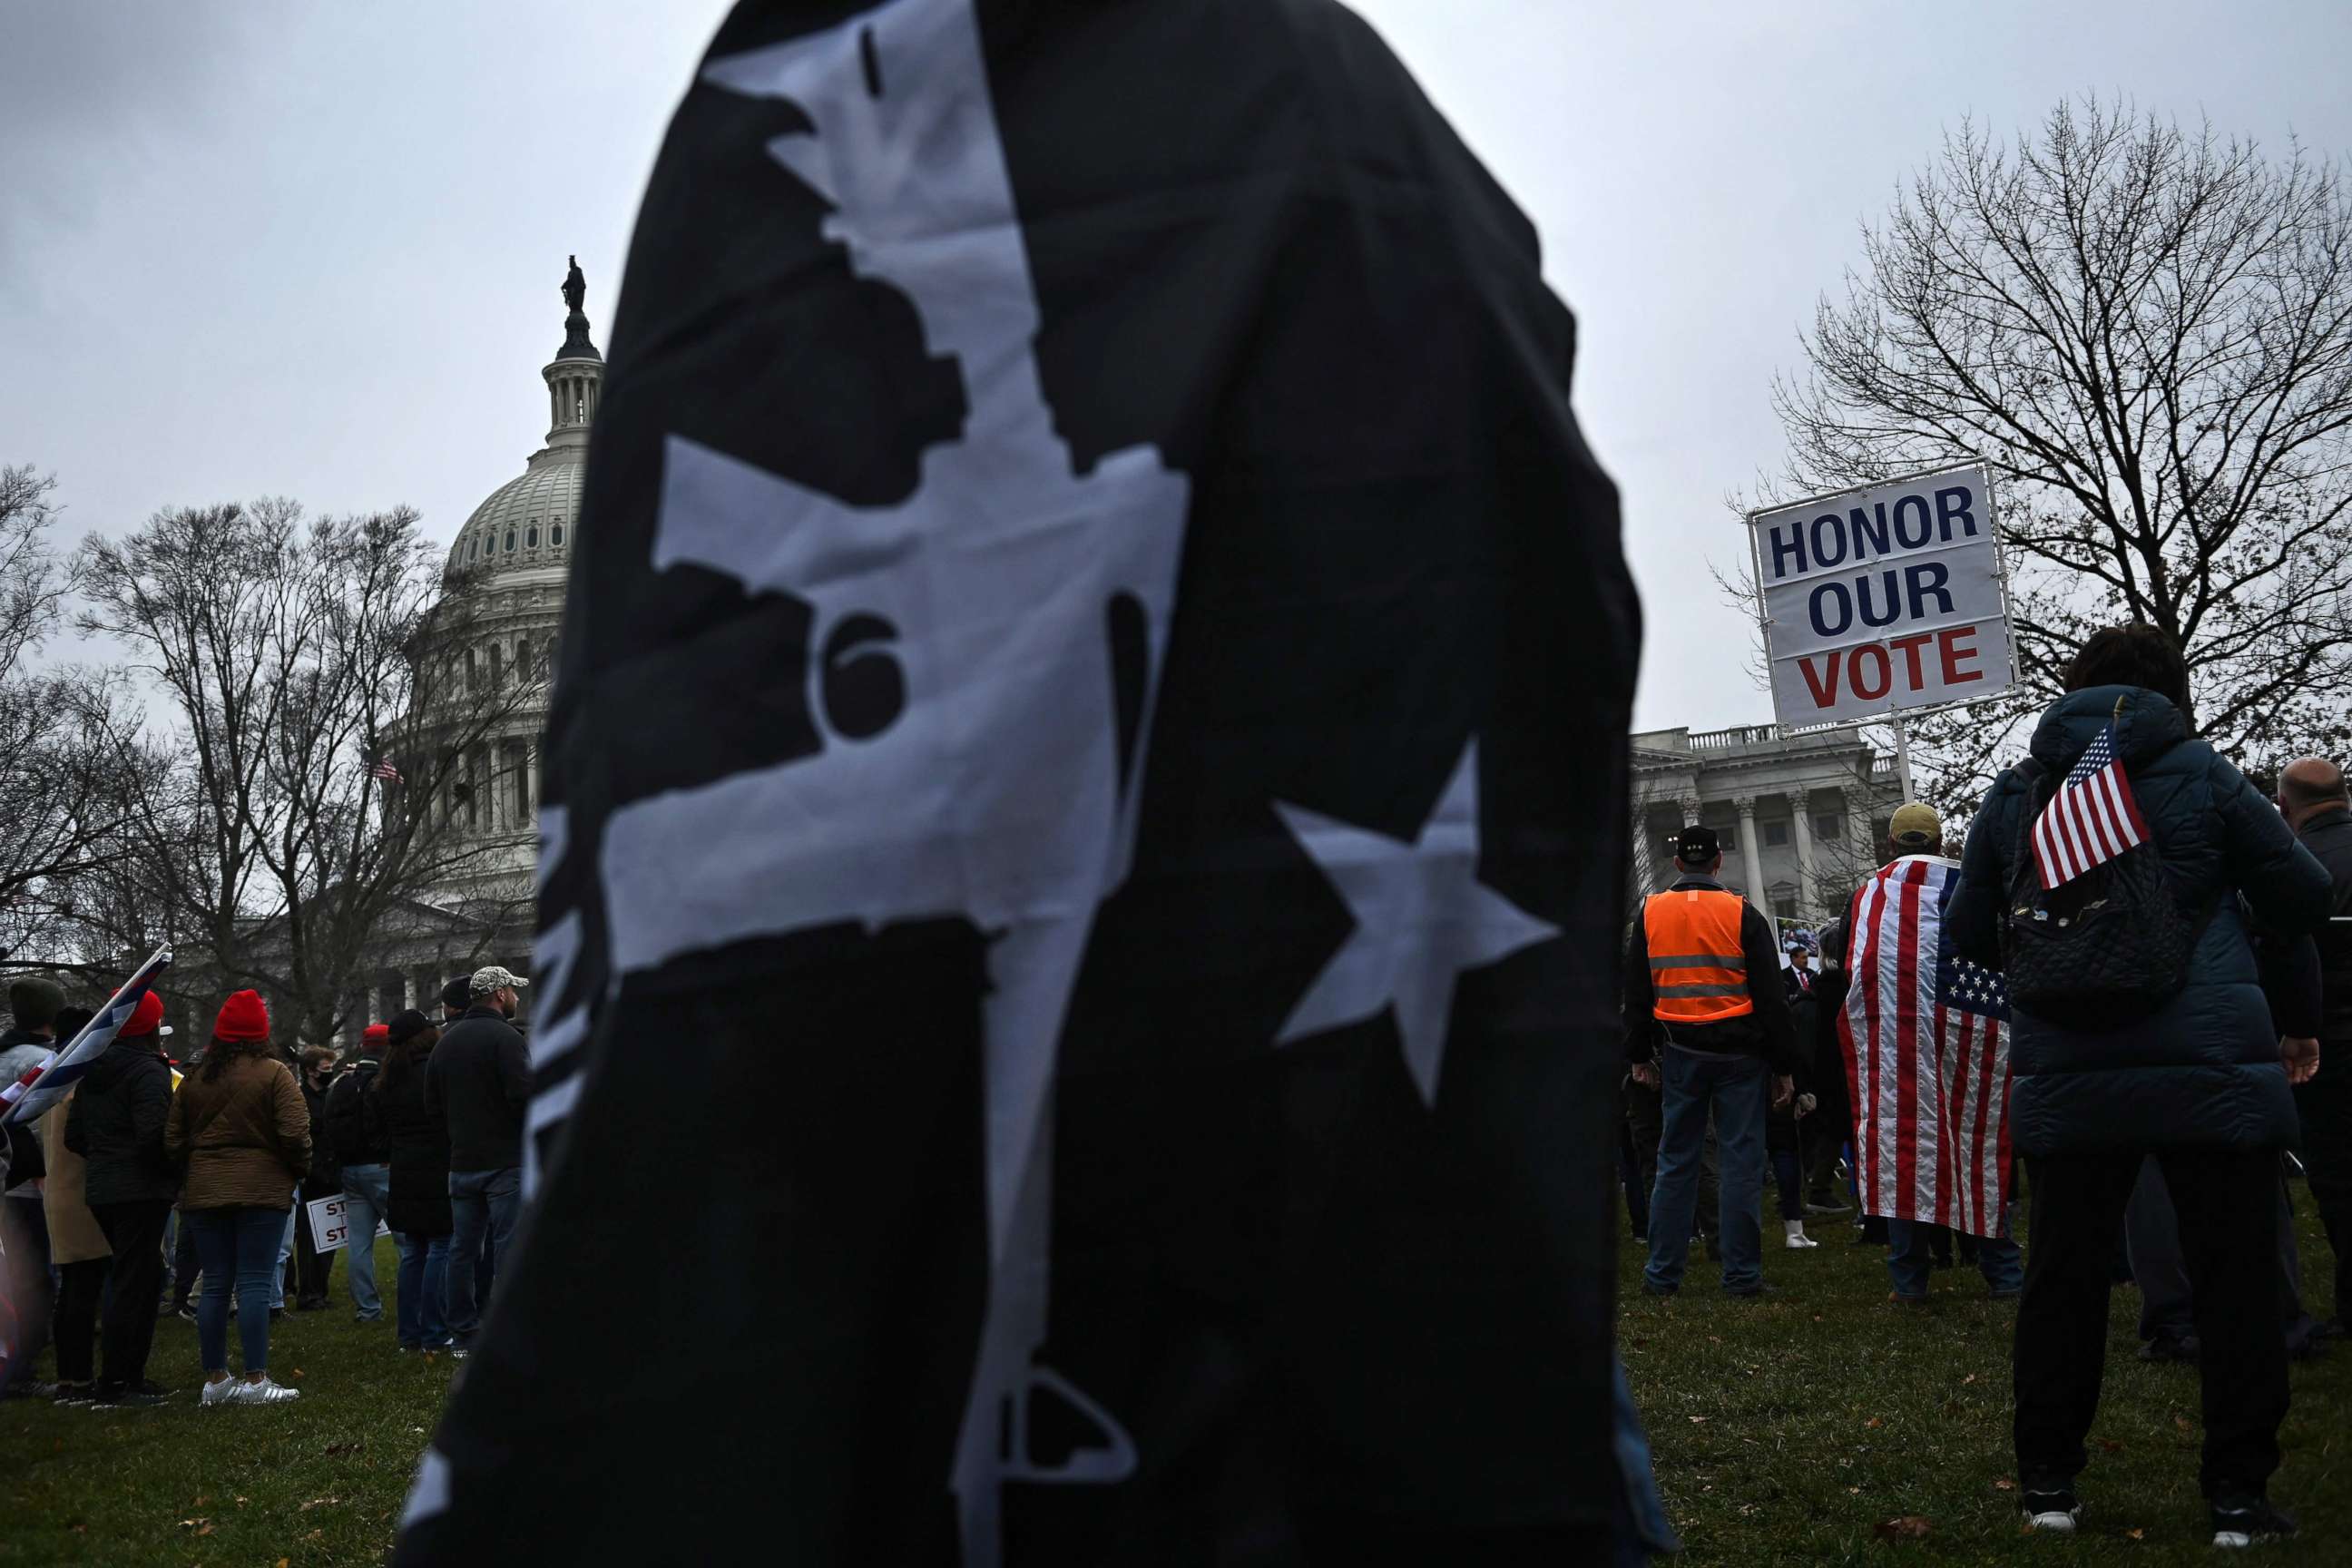 PHOTO: Supporters of President Donald Trump gather at the U.S. Capitol on Jan. 5, 2021, in Washington, D.C.